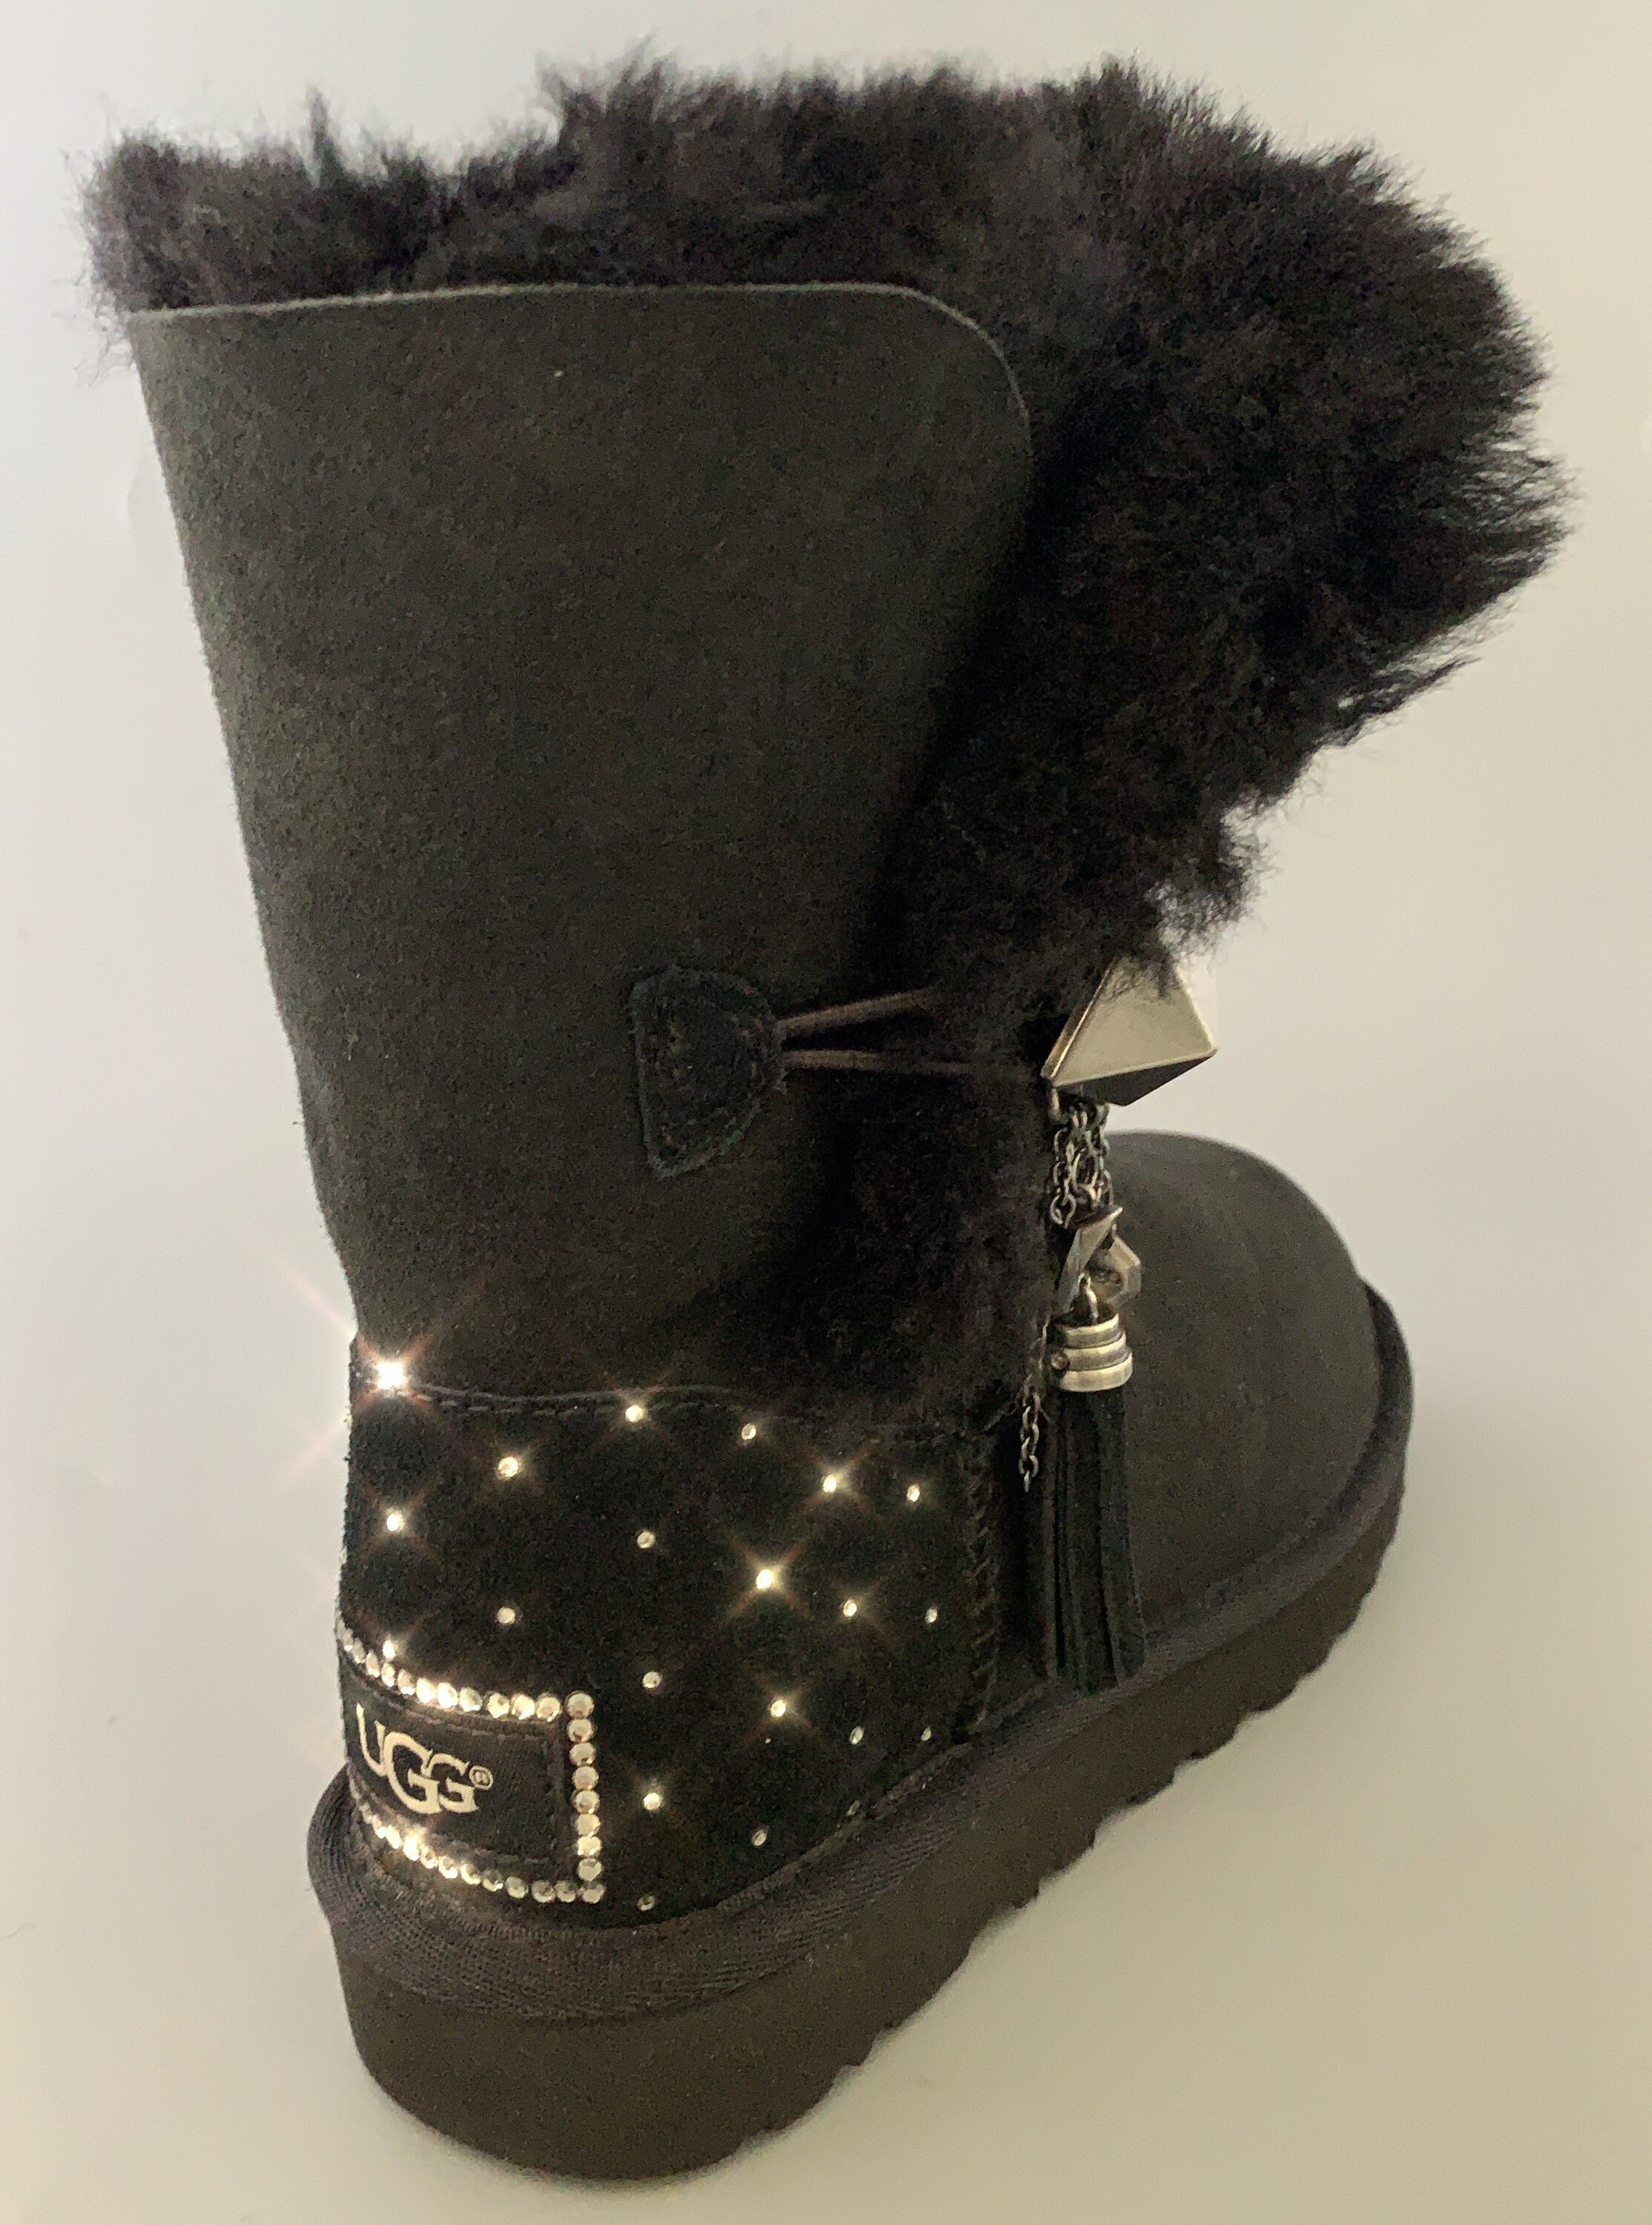 Womans Ugg Boots Customized W Louis Vuitton material and Mink or Tibetan